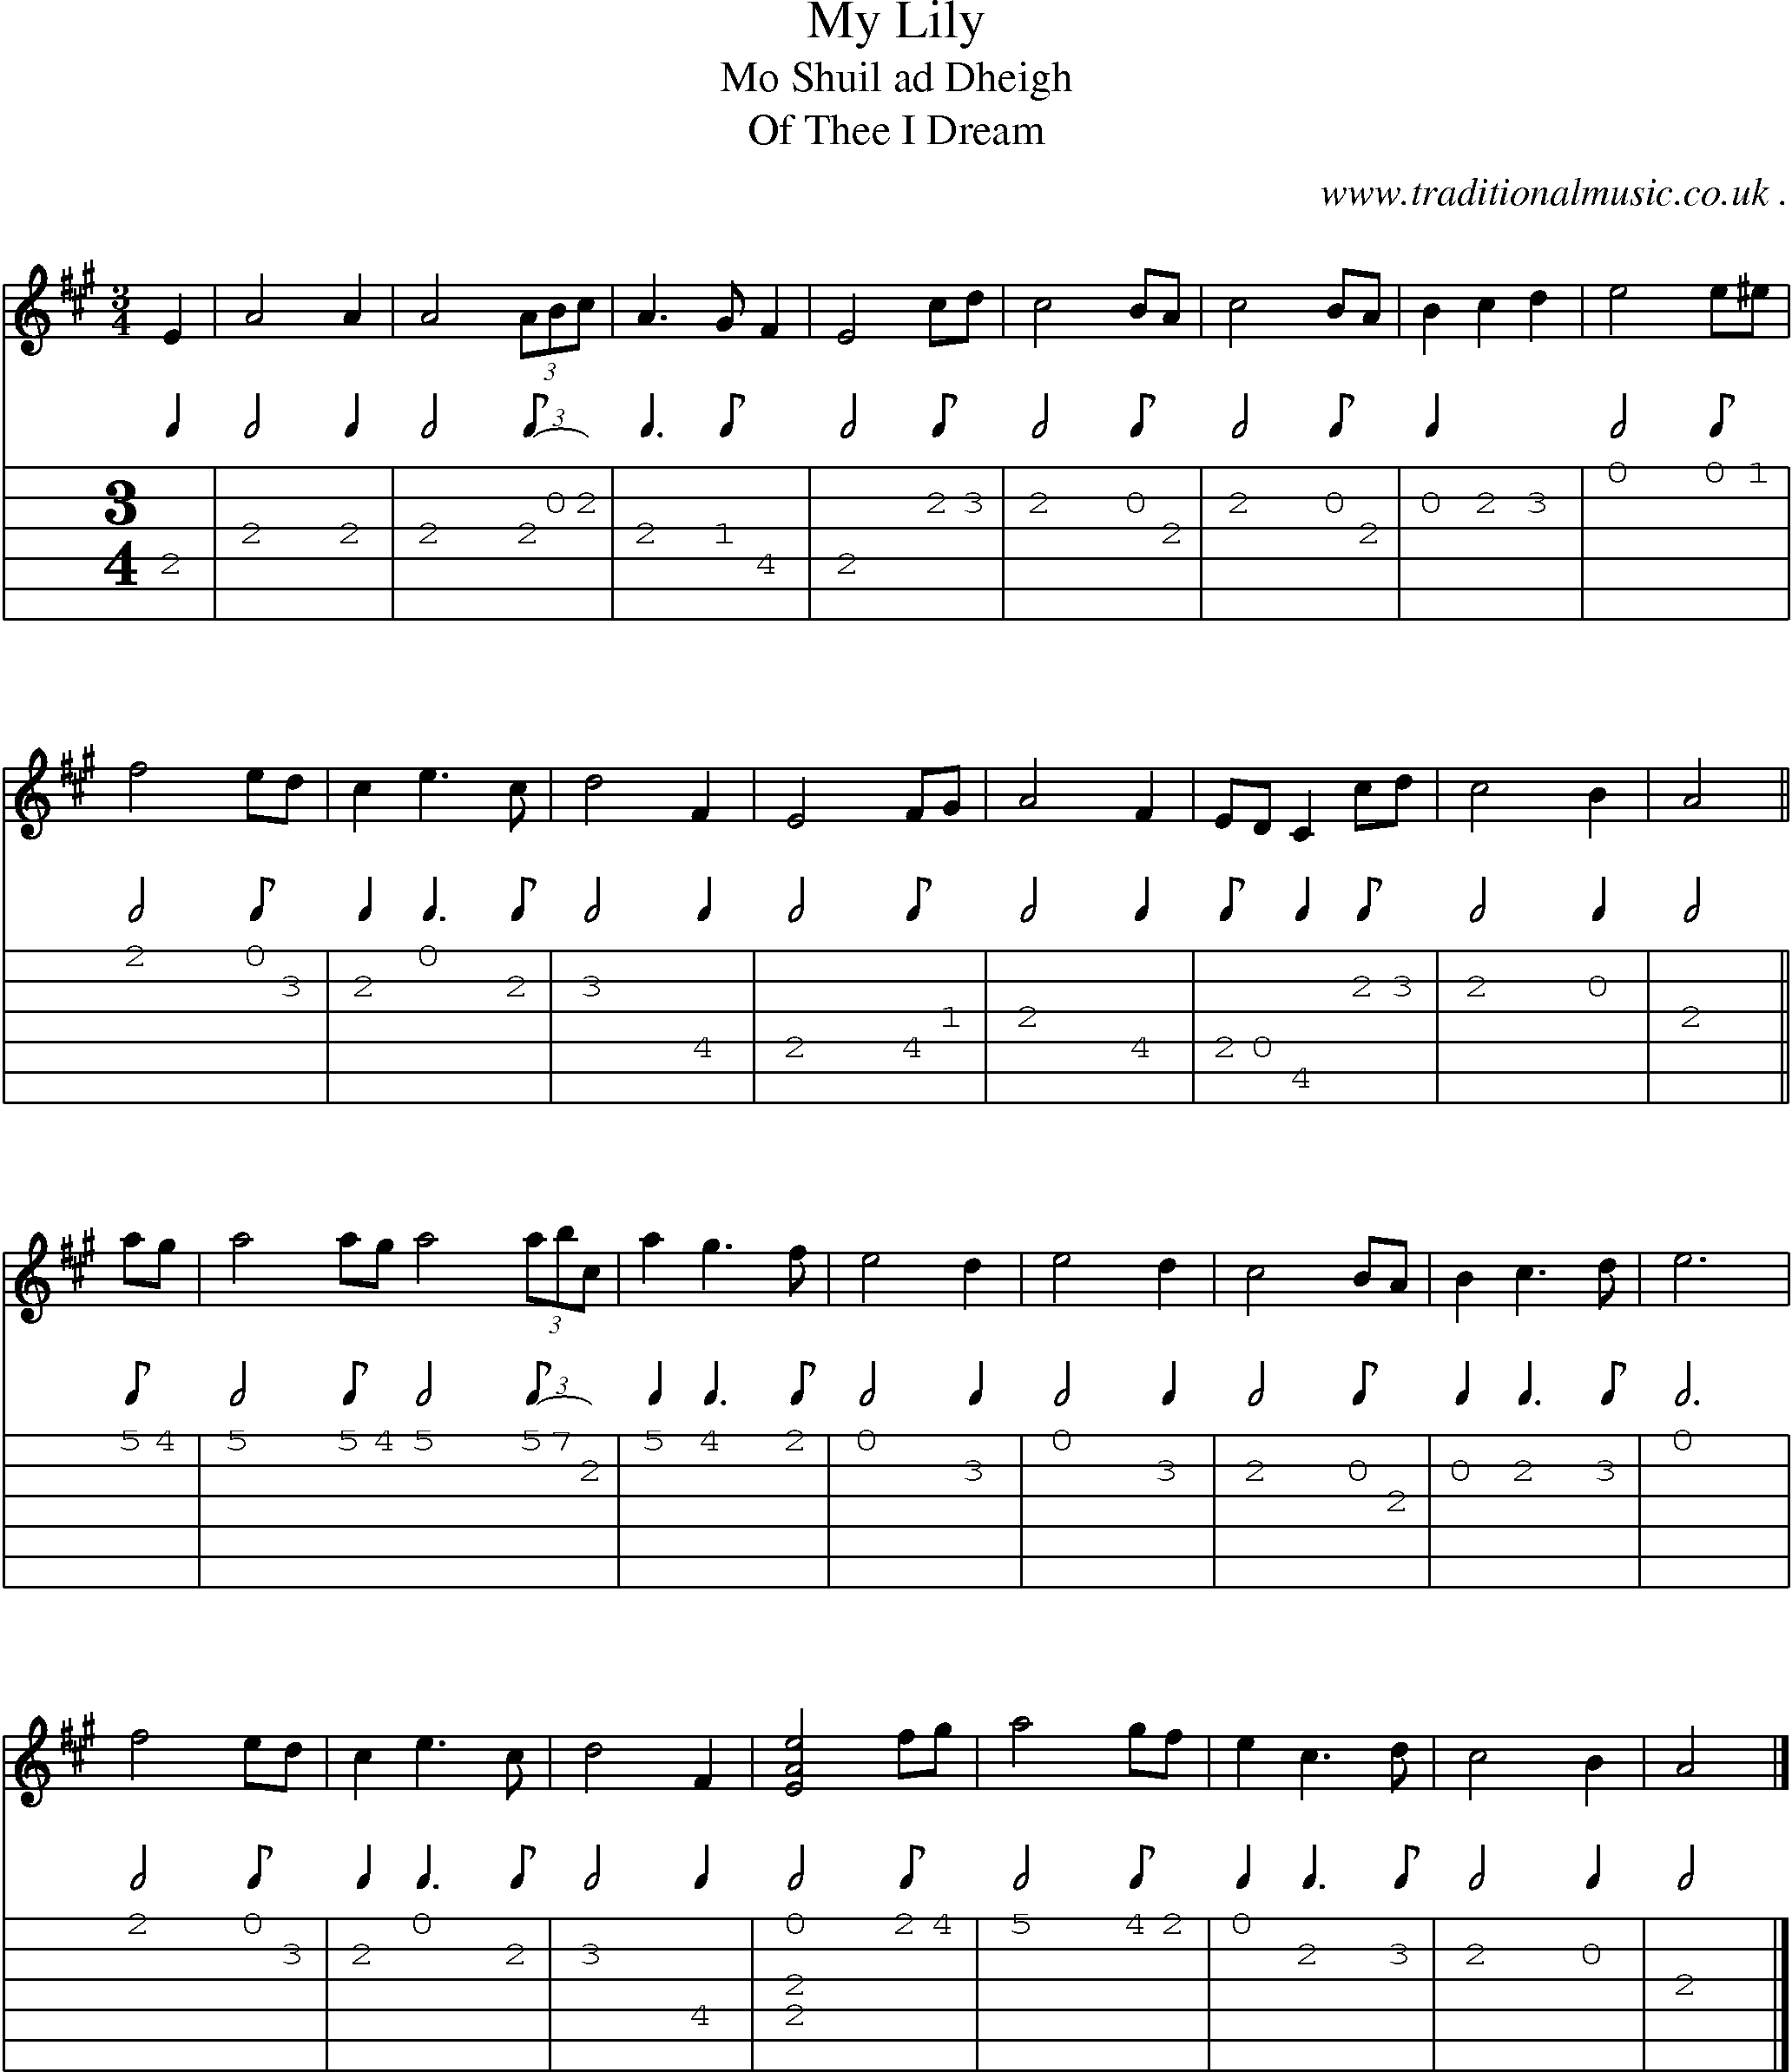 Sheet-music  score, Chords and Guitar Tabs for My Lily